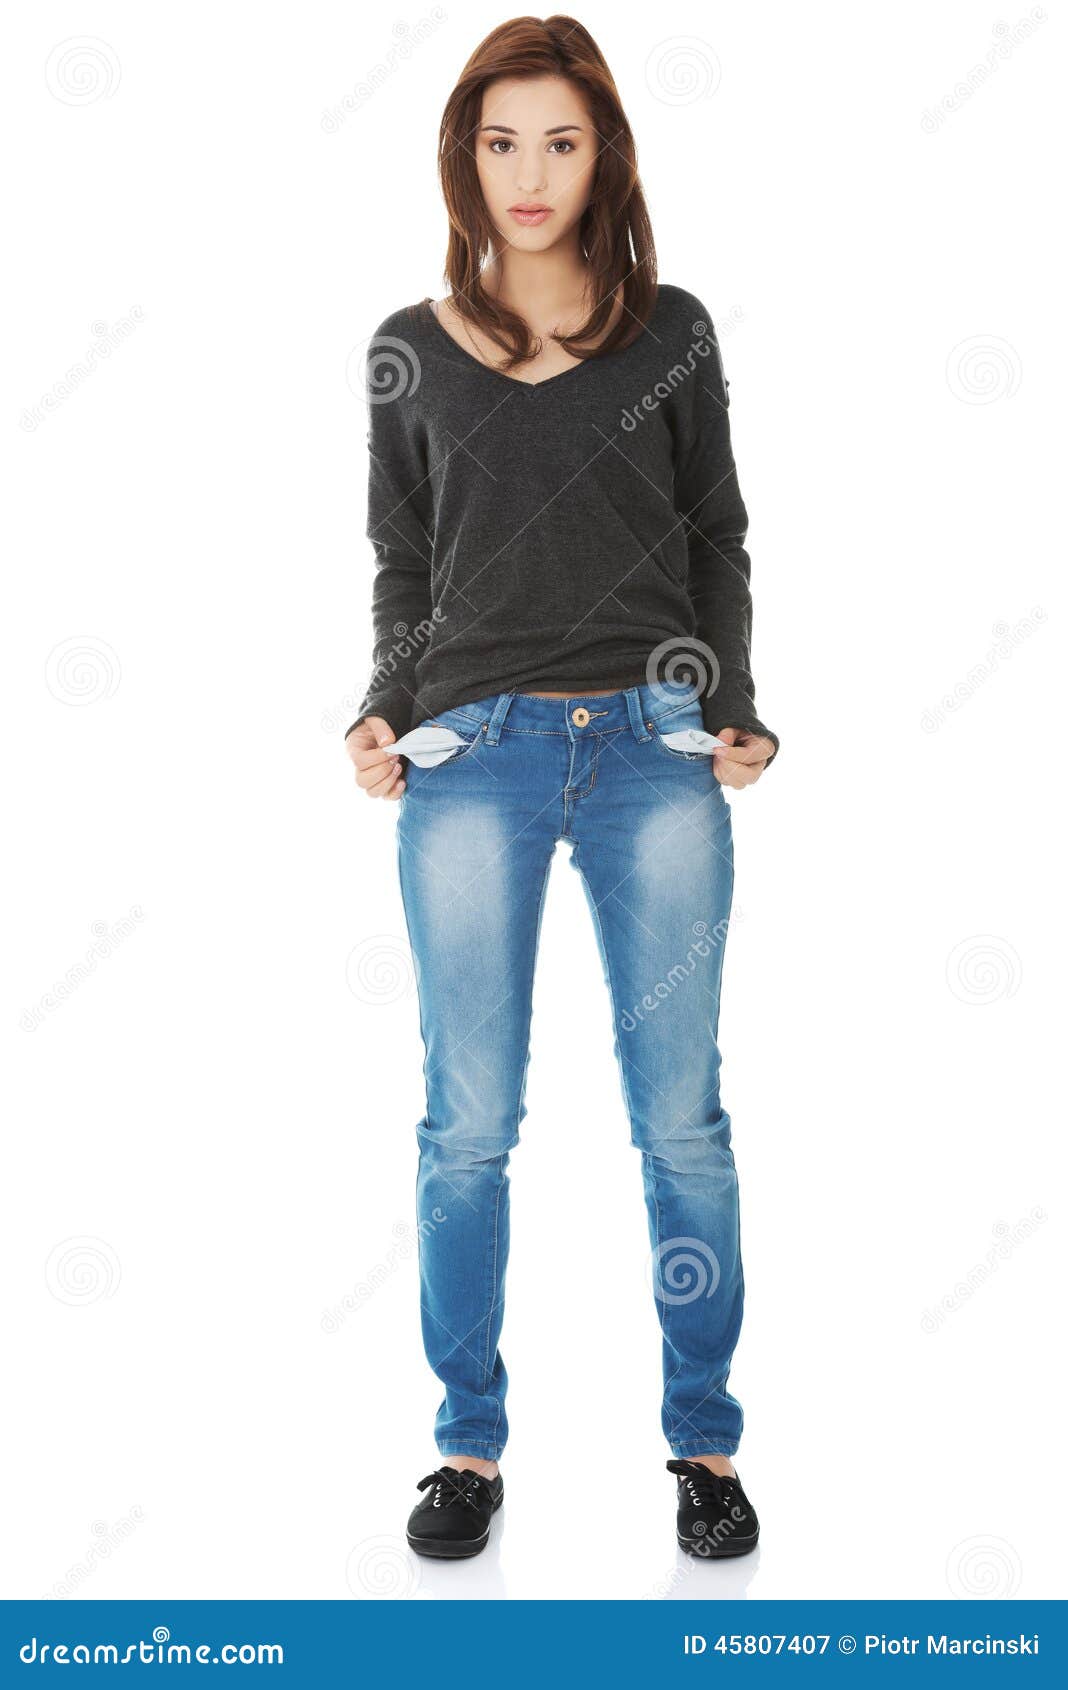 Sad Woman Taking Out Empty Pockets Stock Image - Image of pocket ...